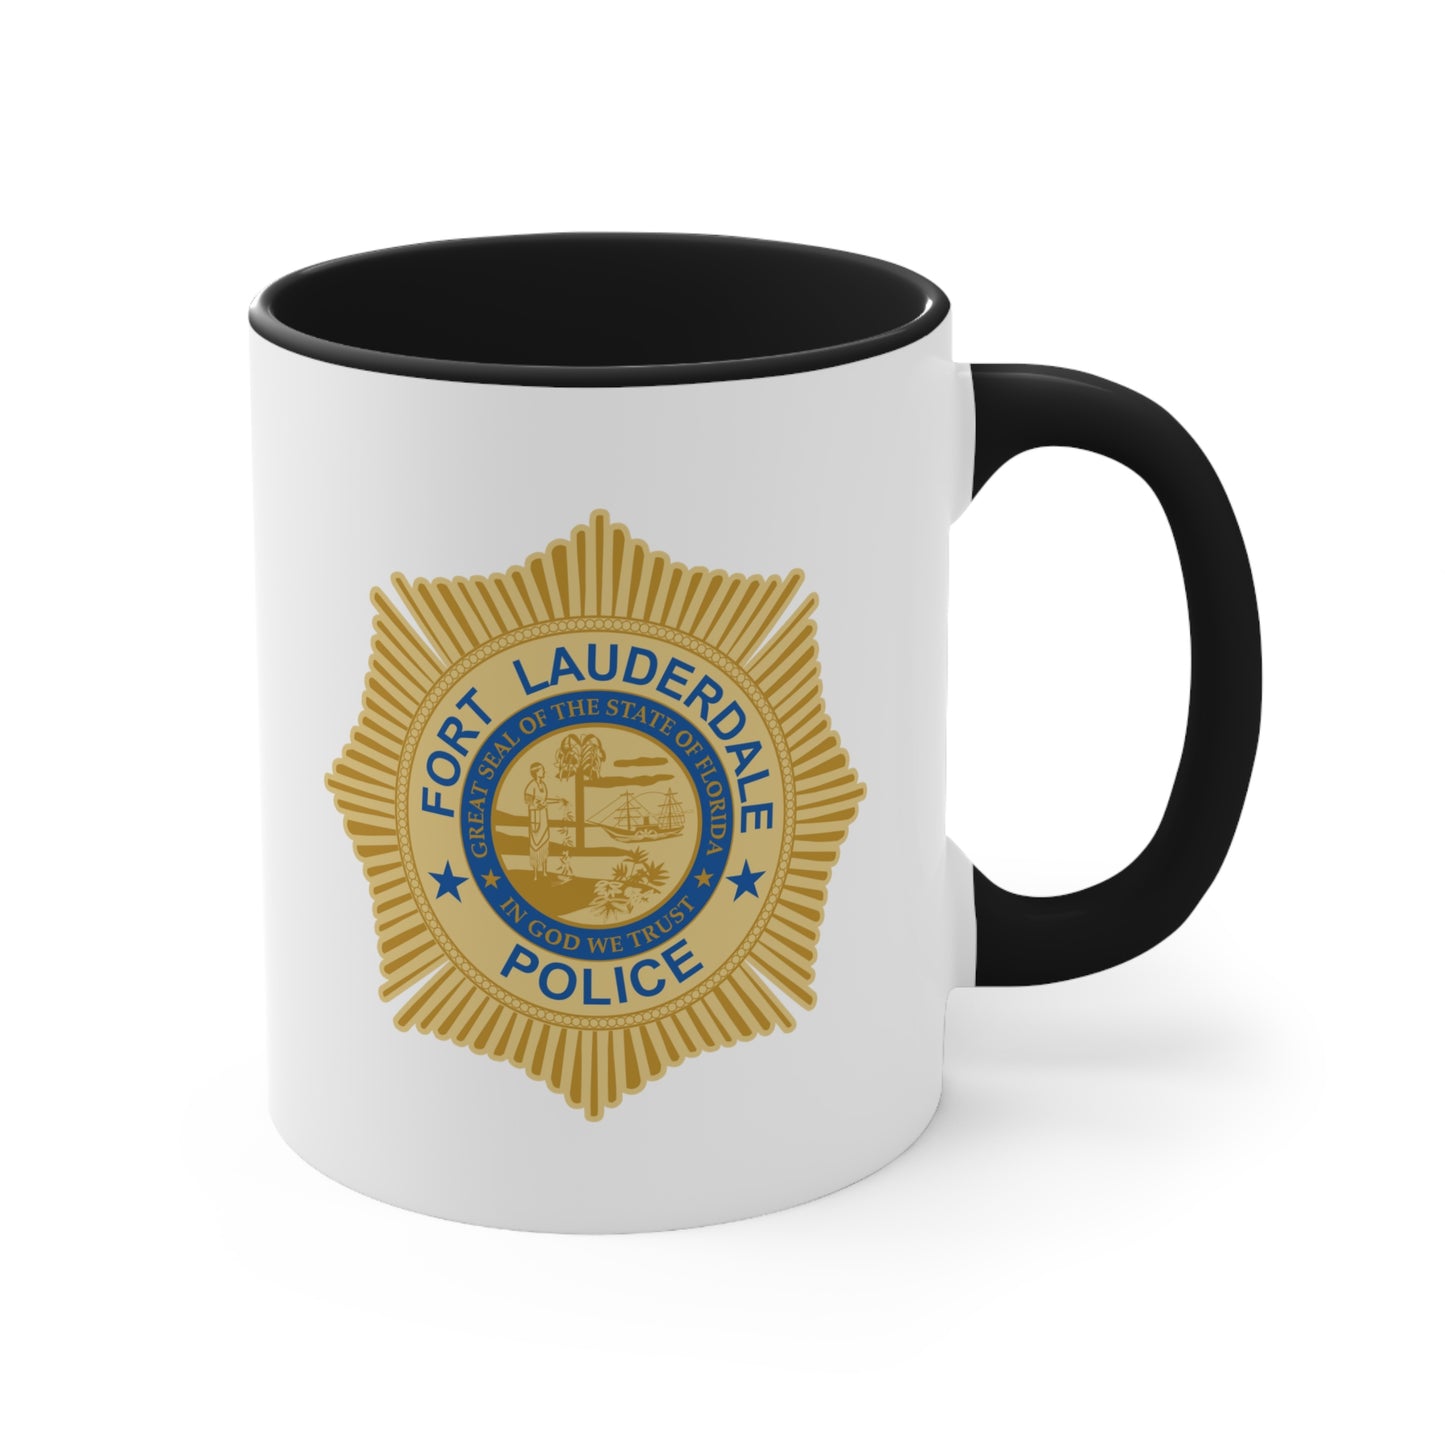 Fort Lauderdale Police Coffee Mug - Double Sided Black Accent White Ceramic 11oz by TheGlassyLass.com